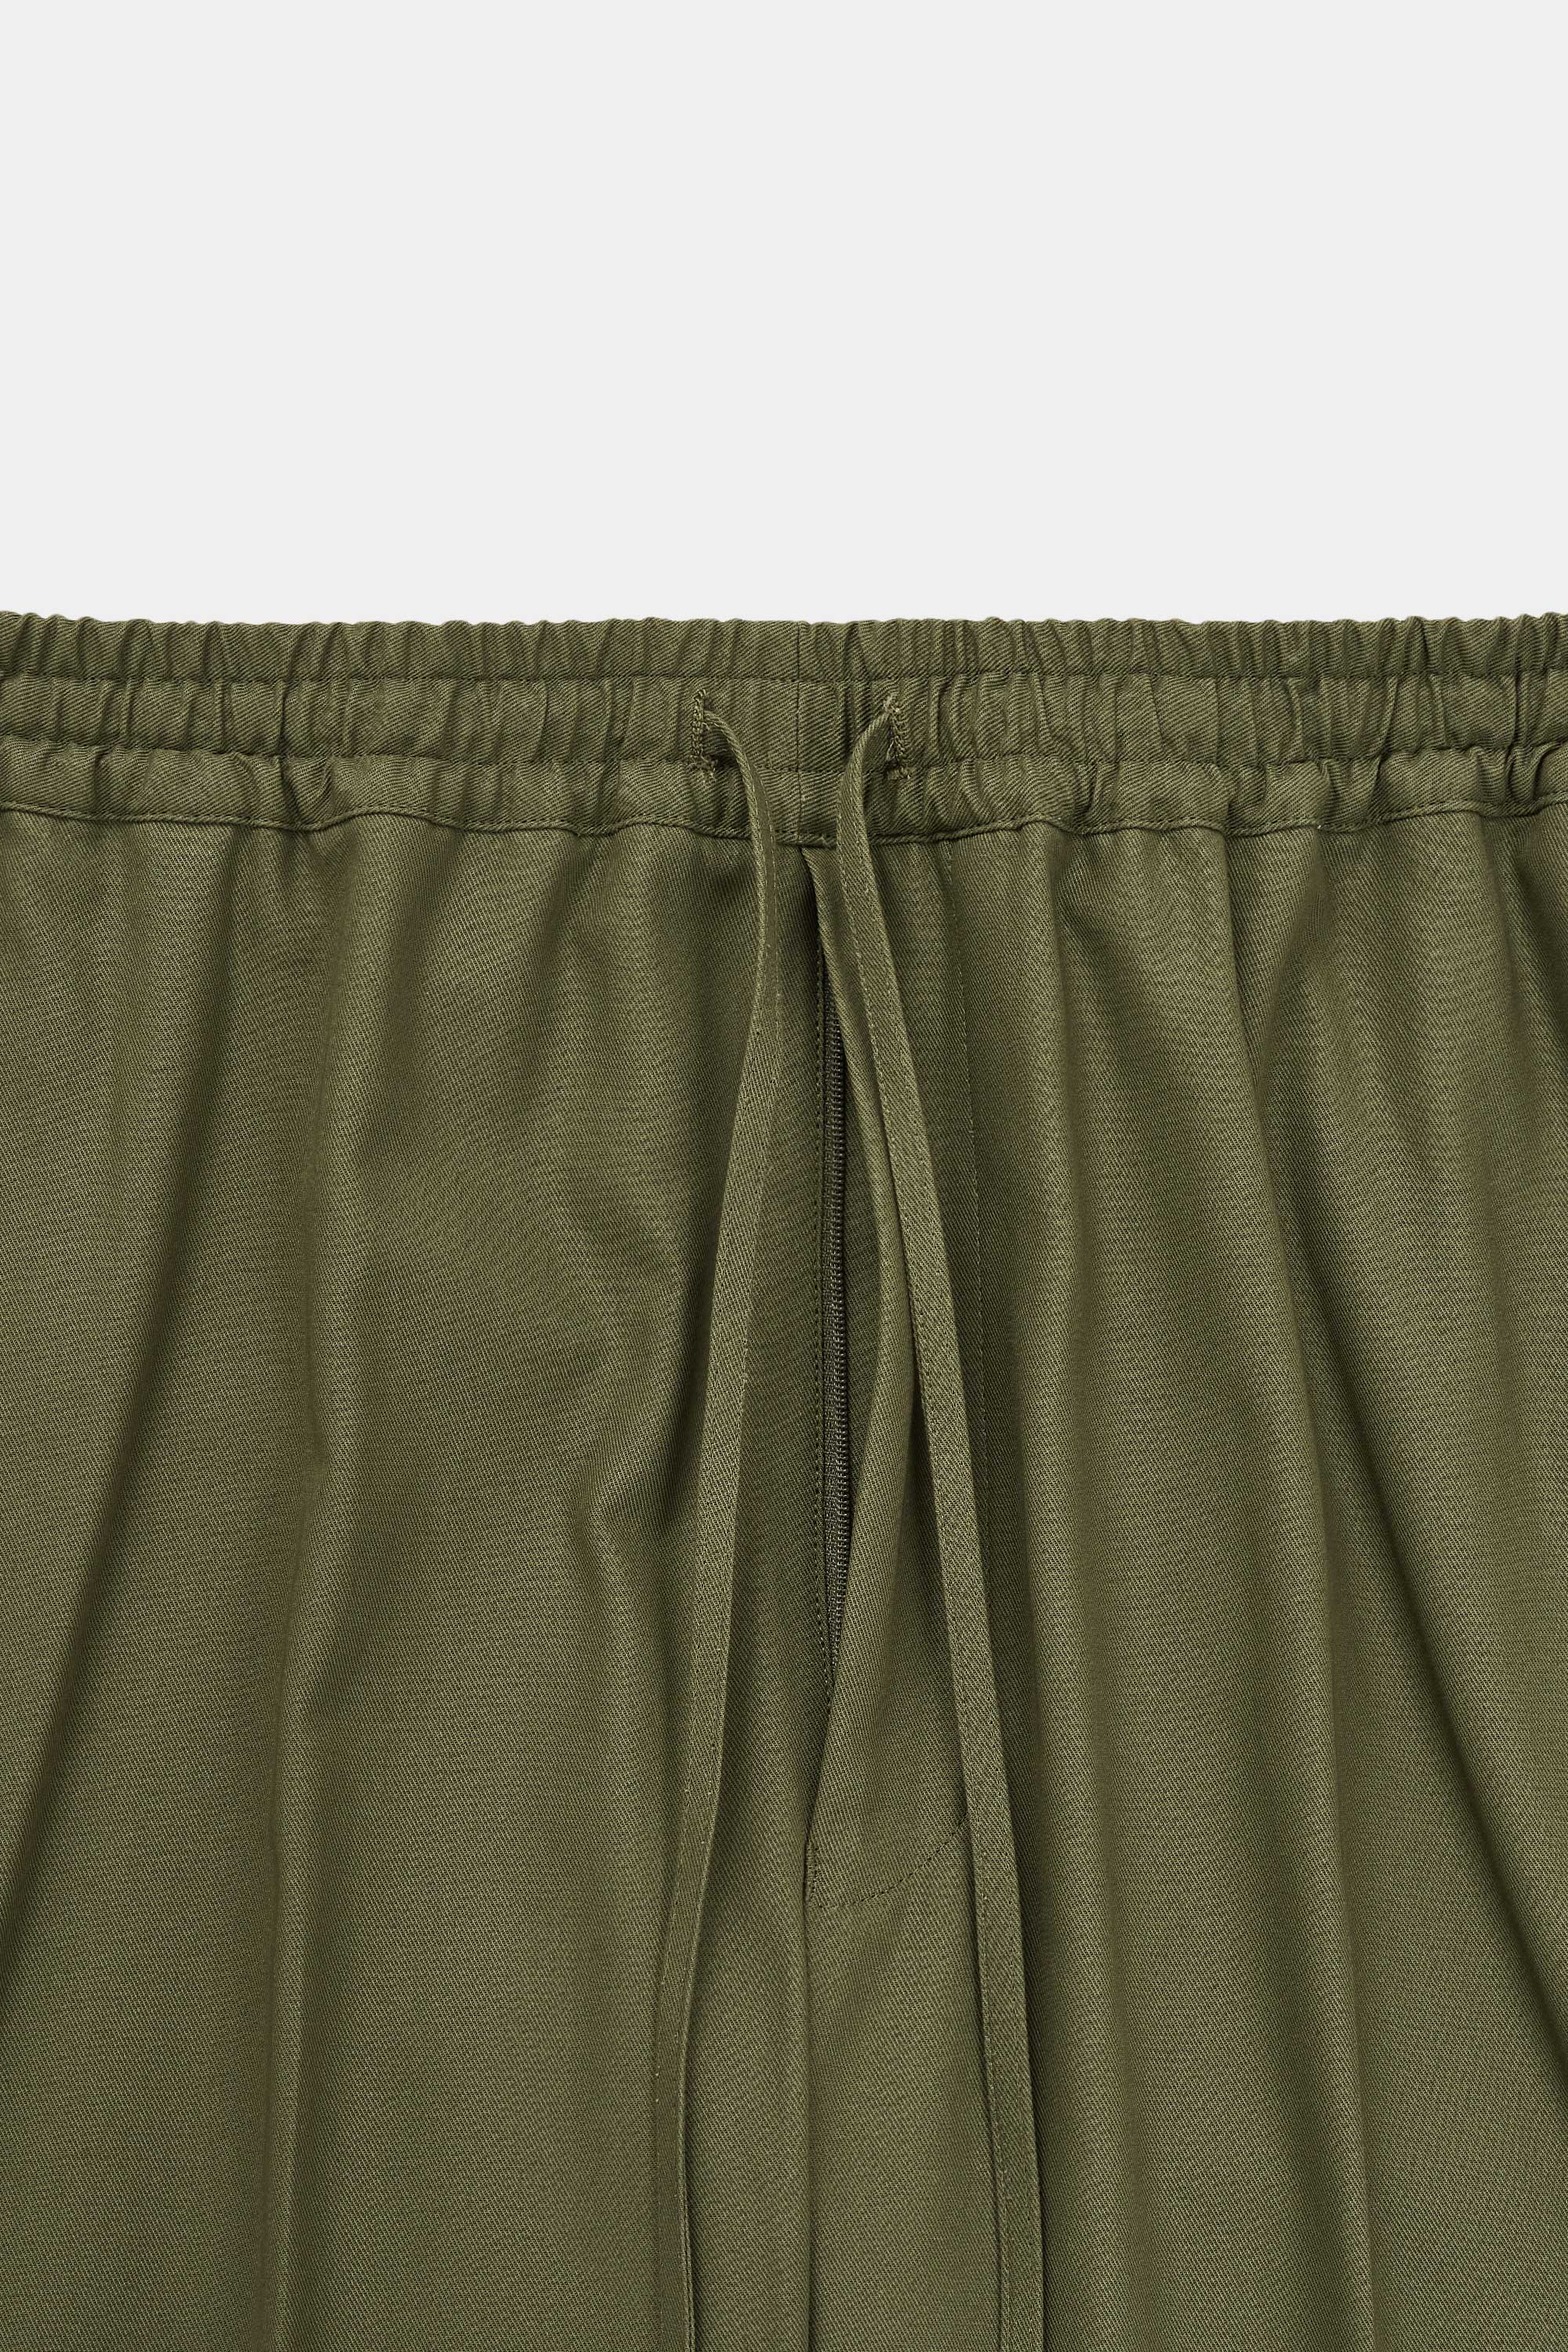 Organic Cotton Dry Twill Classic Fit Easy Pants, Olive – MARKAWARE